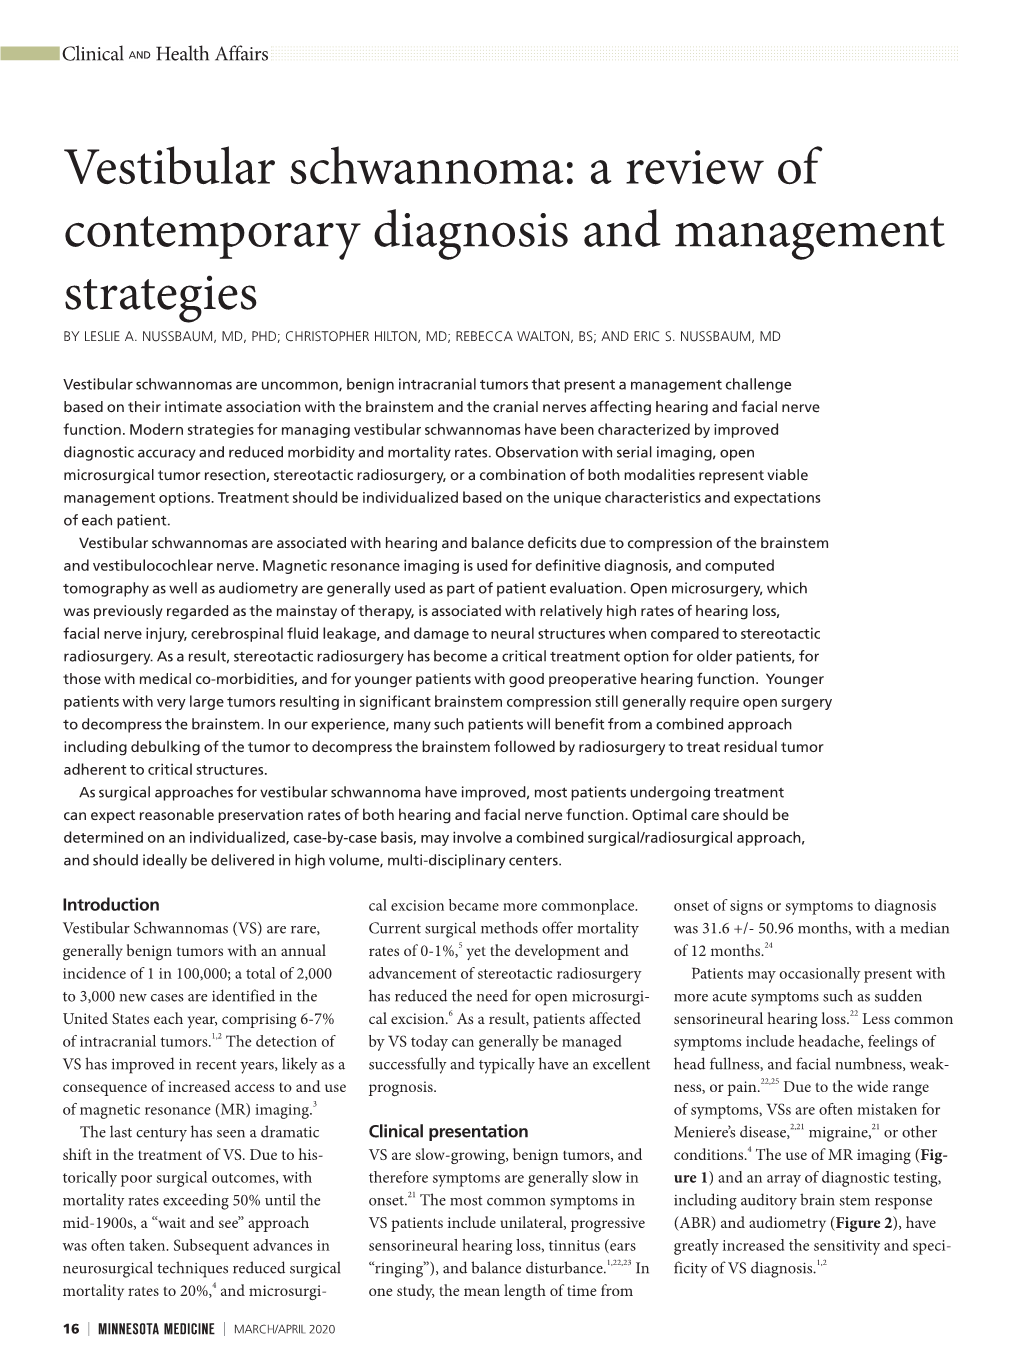 Vestibular Schwannoma: a Review of Contemporary Diagnosis and Management Strategies by LESLIE A